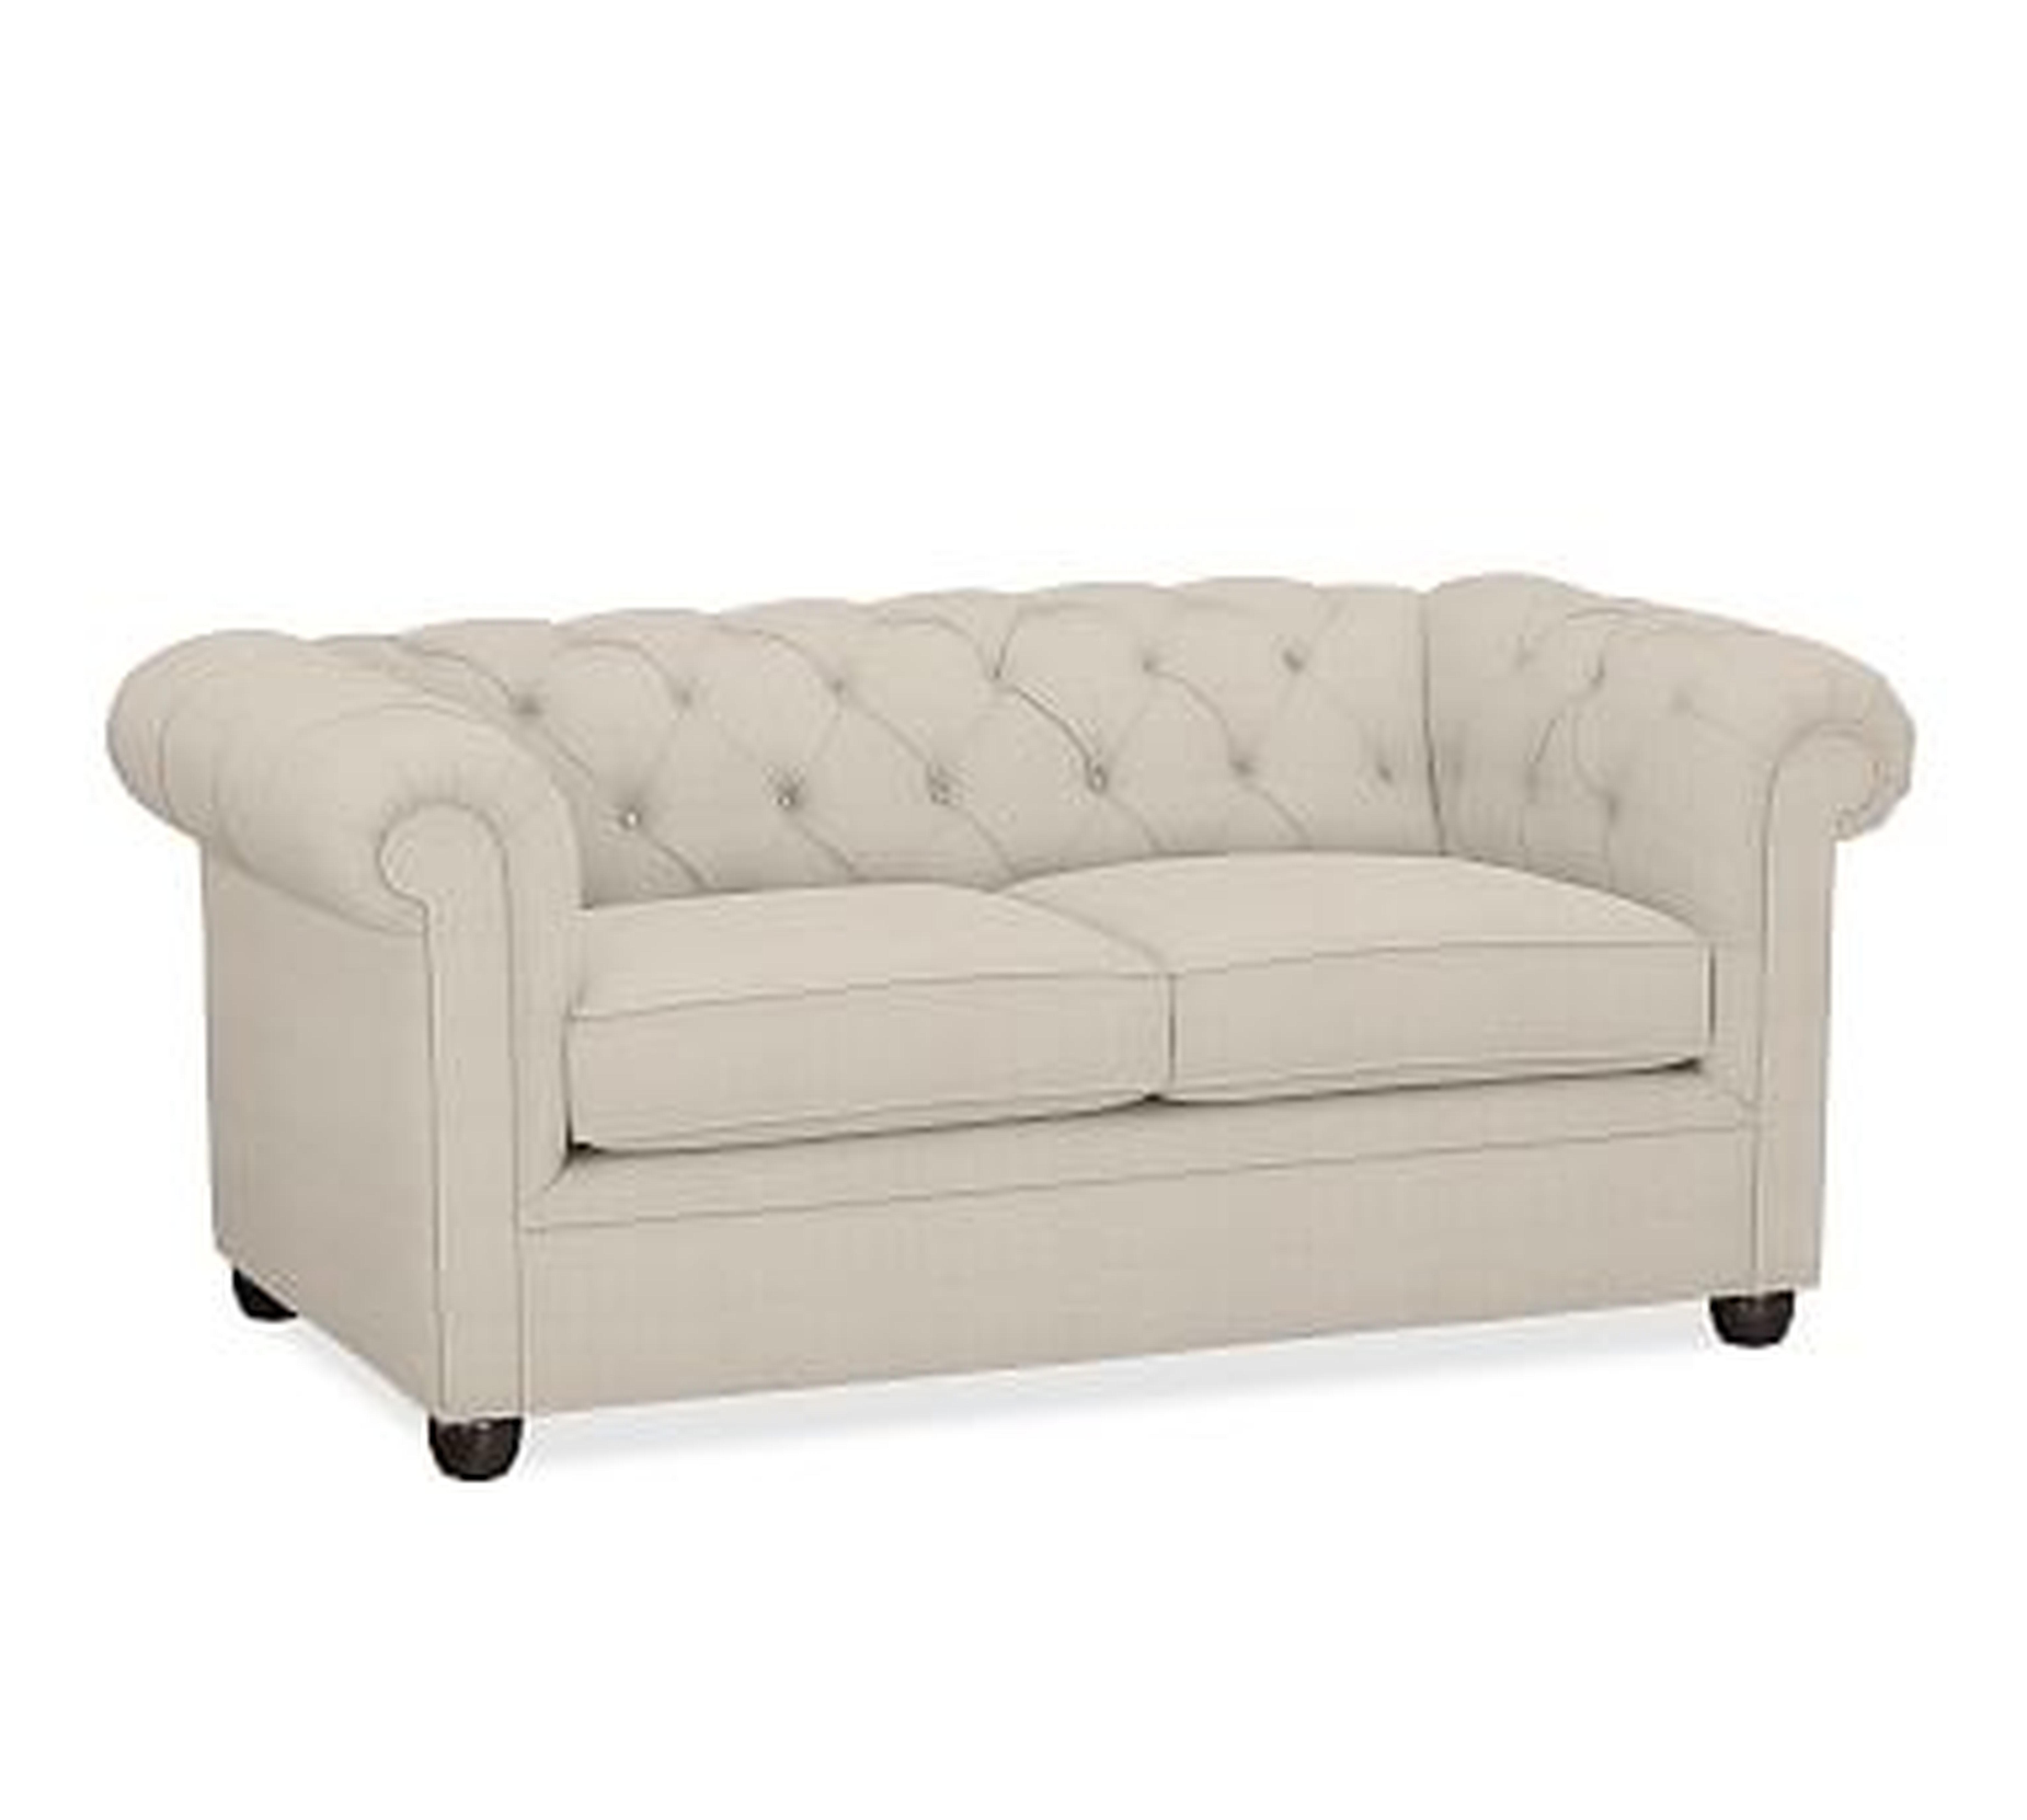 Chesterfield Upholstered Loveseat 72", Polyester Wrapped Cushions, Performance Everydaylinen(TM) by Crypton(R) Home(TM) Oatmeal - Pottery Barn